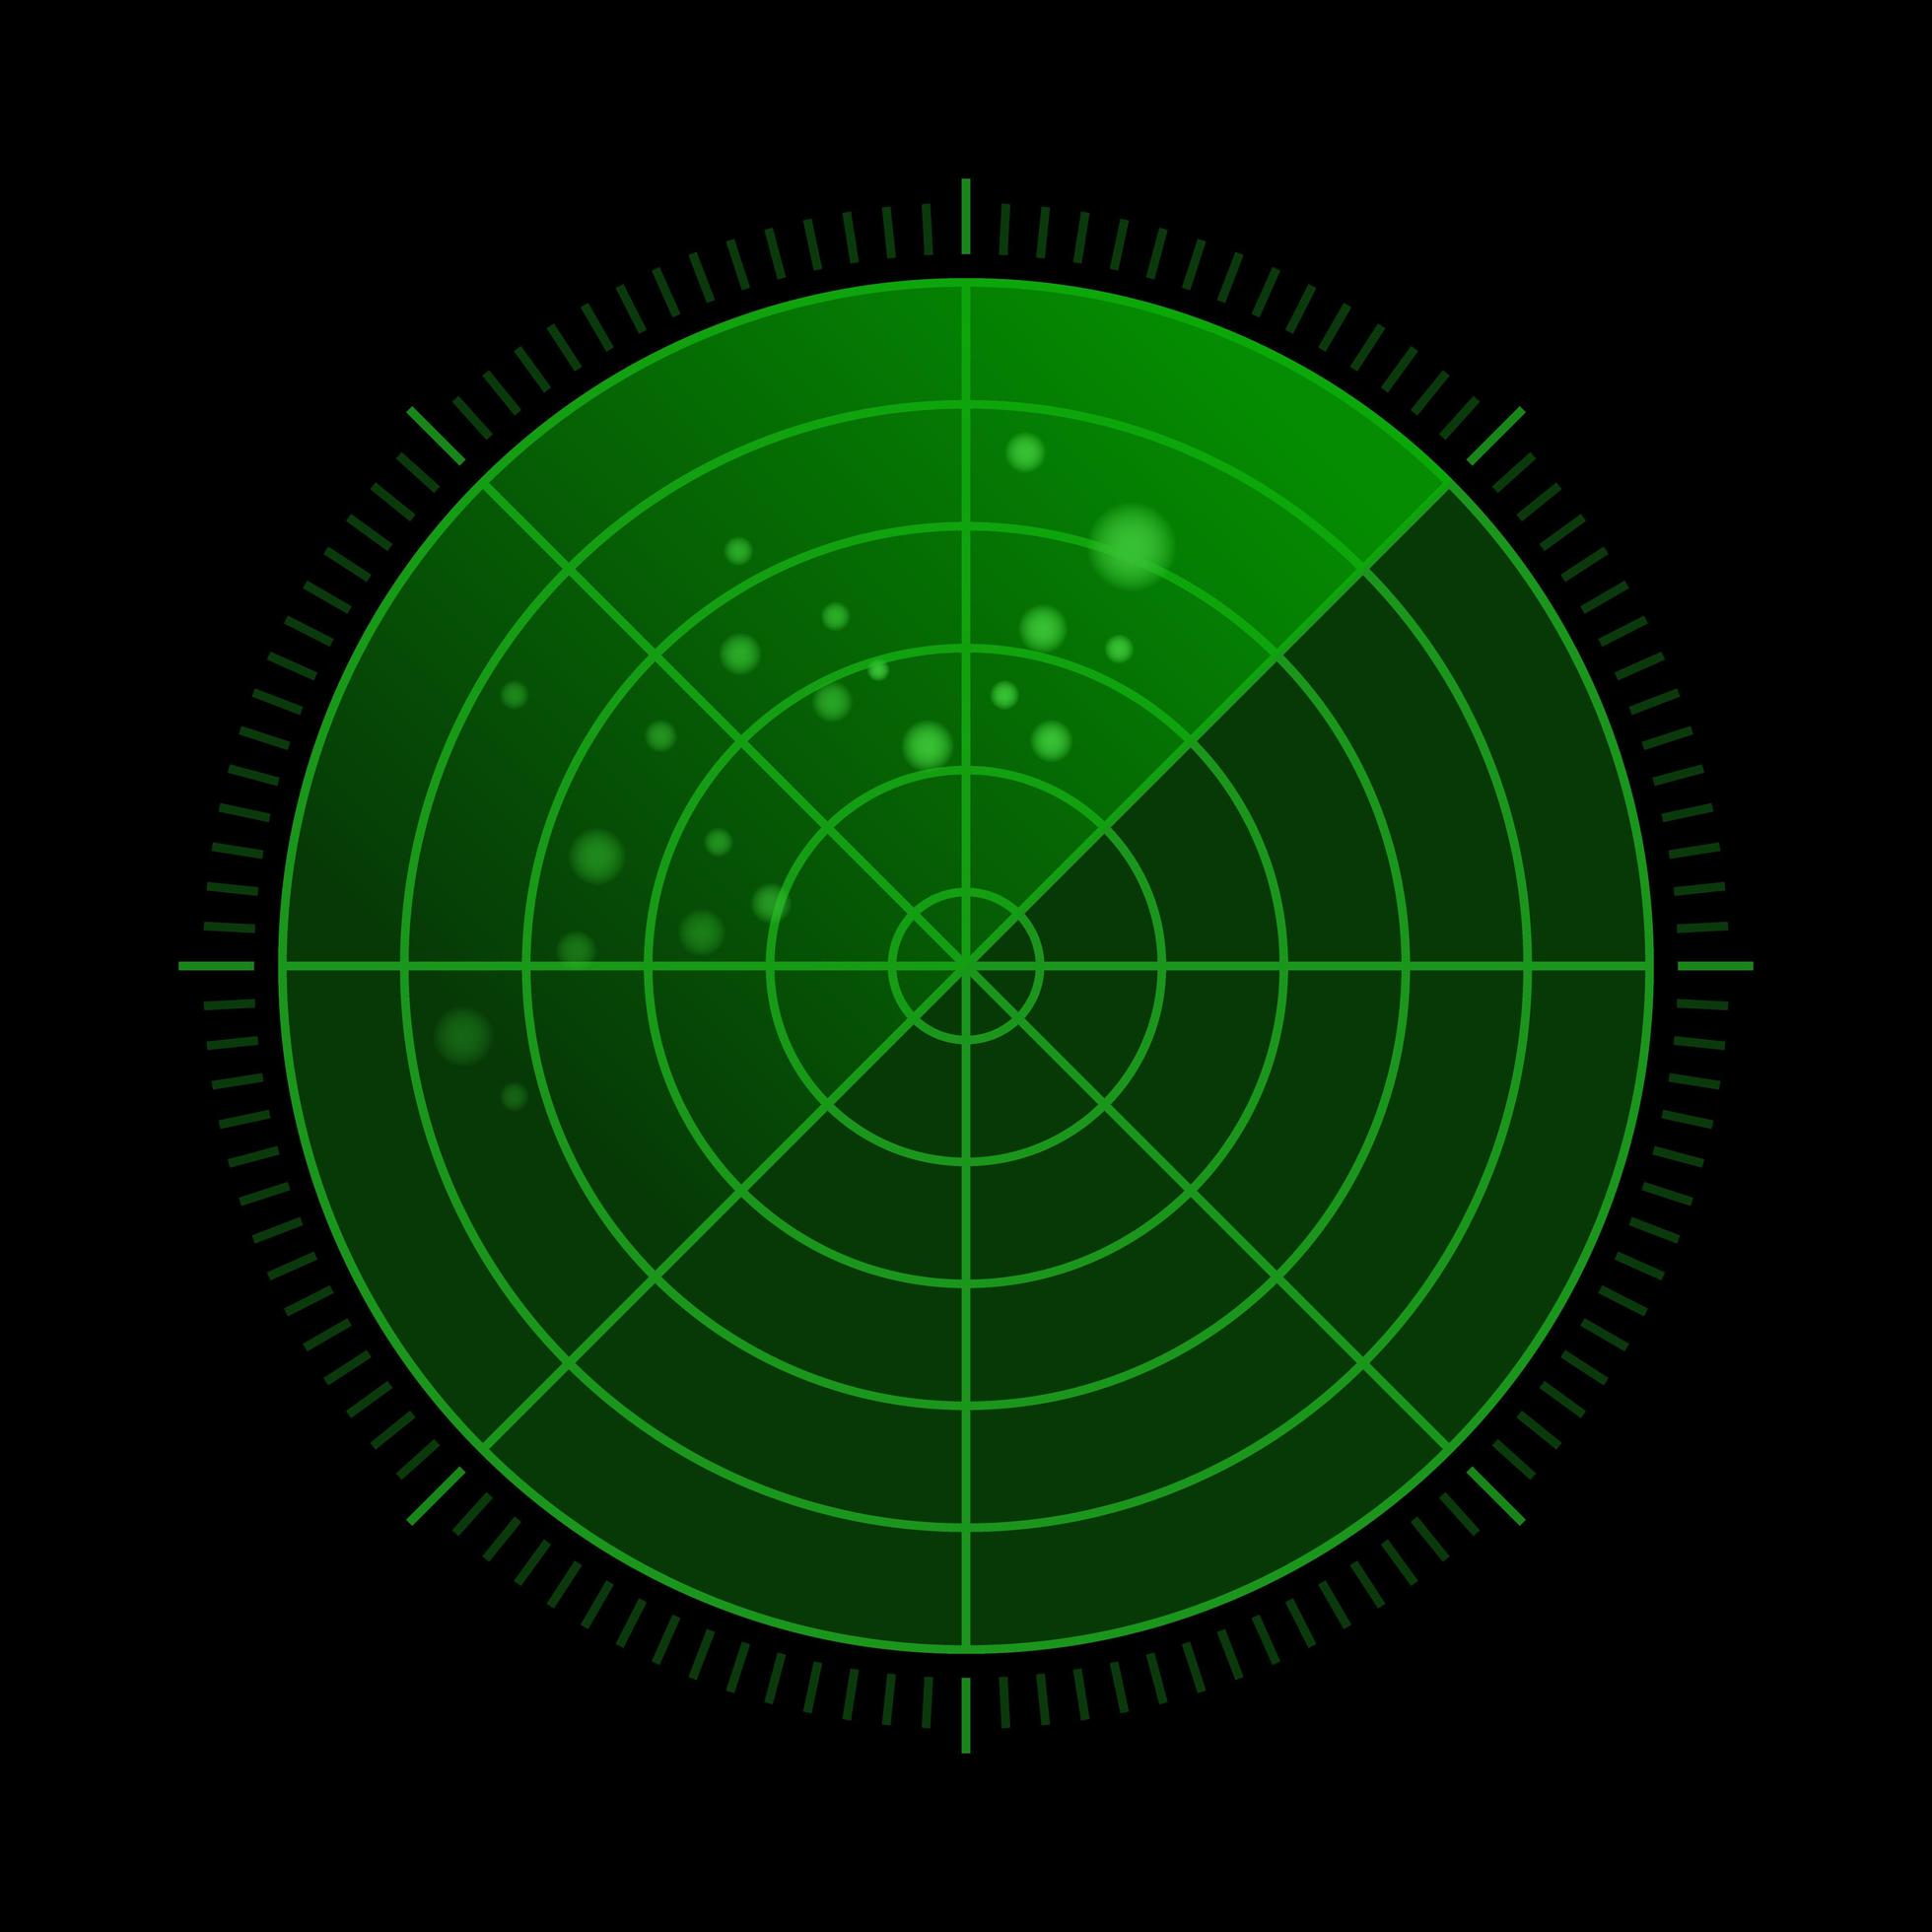 HUD green radar with targets in action - Download Free Vectors, Clipart ...